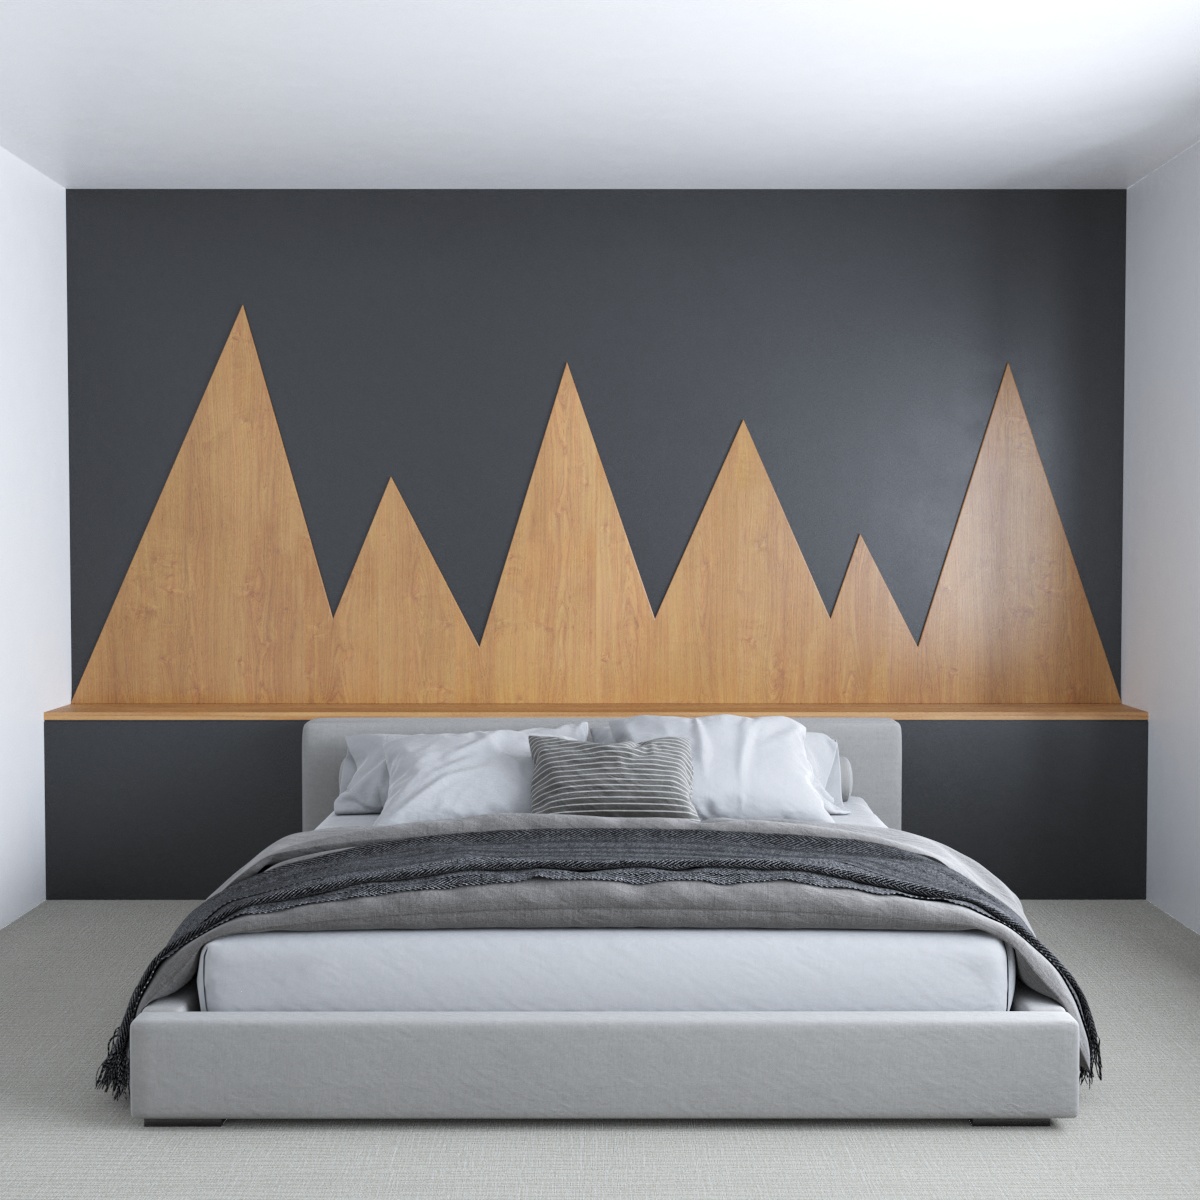 Inspired by mountains, this wood accent wall has a series of peaks that stand out against the backdrop of the black-painted wall.